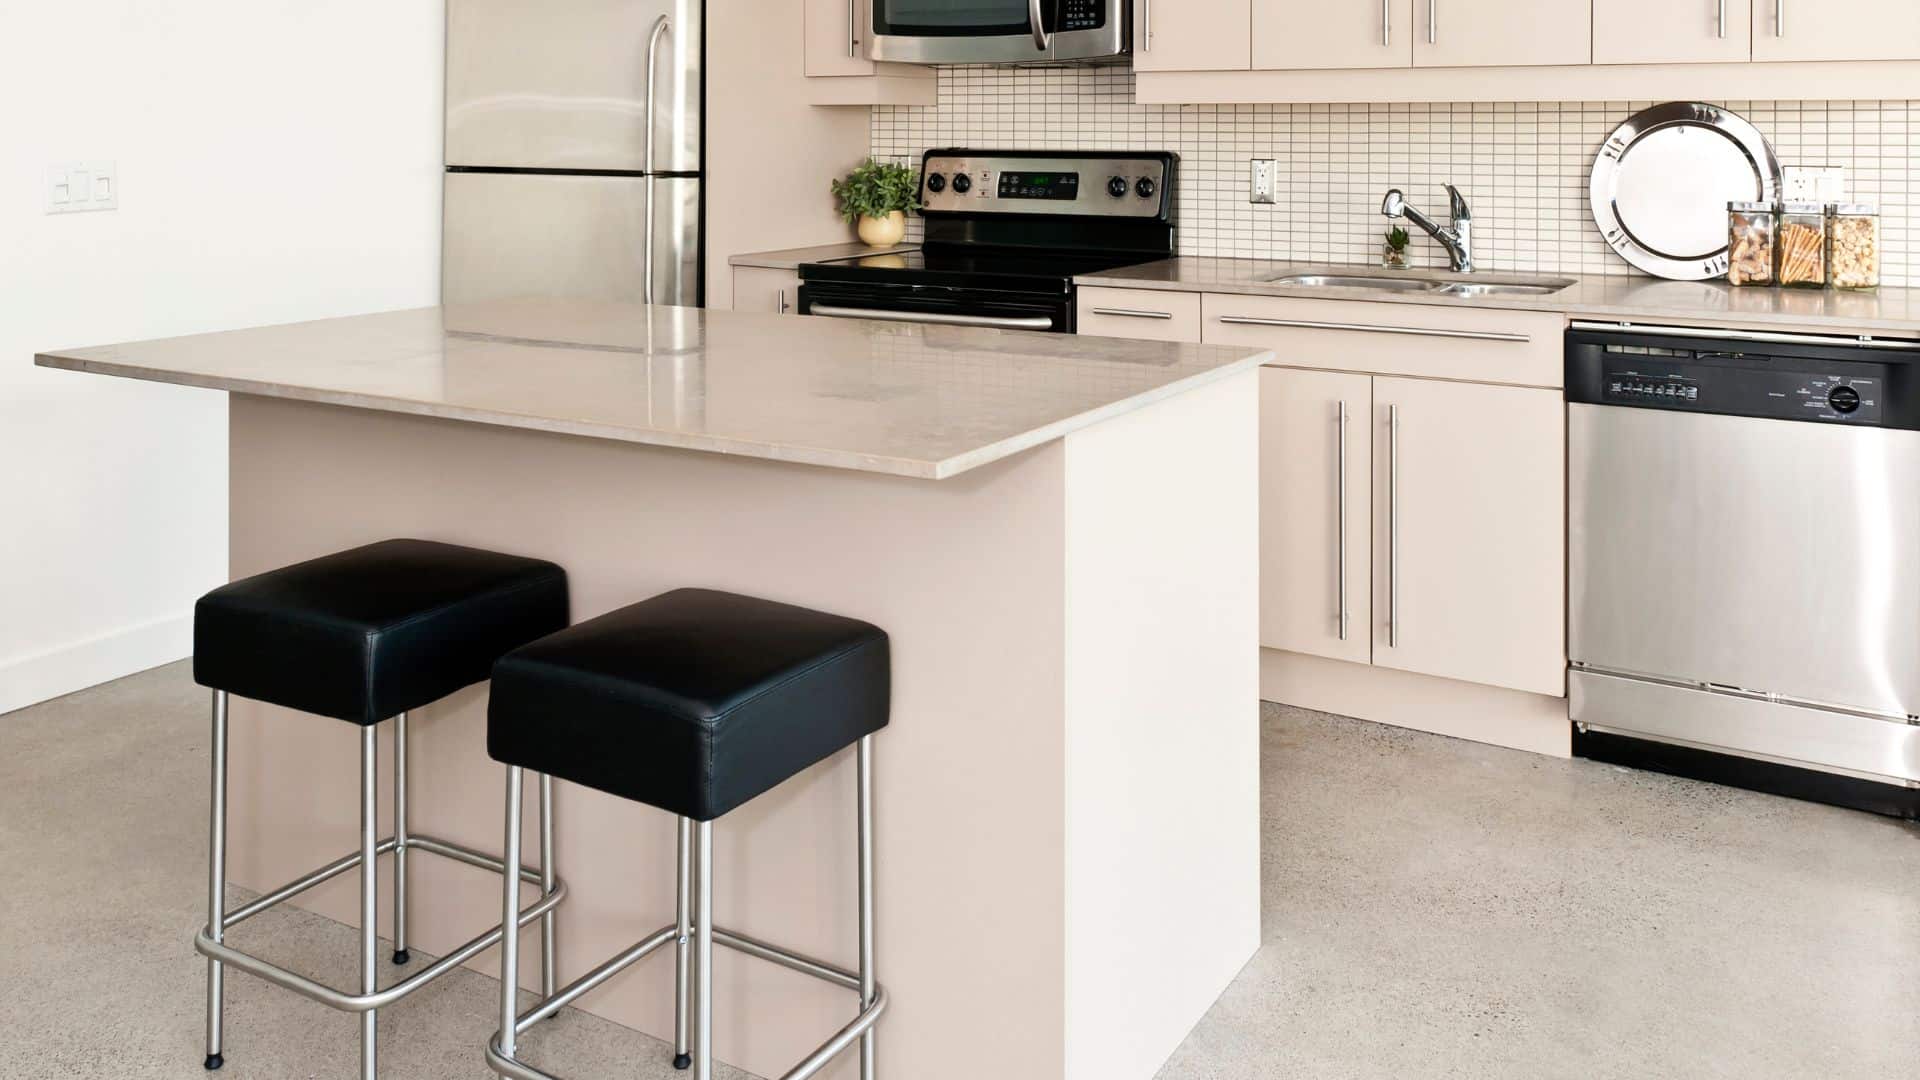 Kitchen style with center island